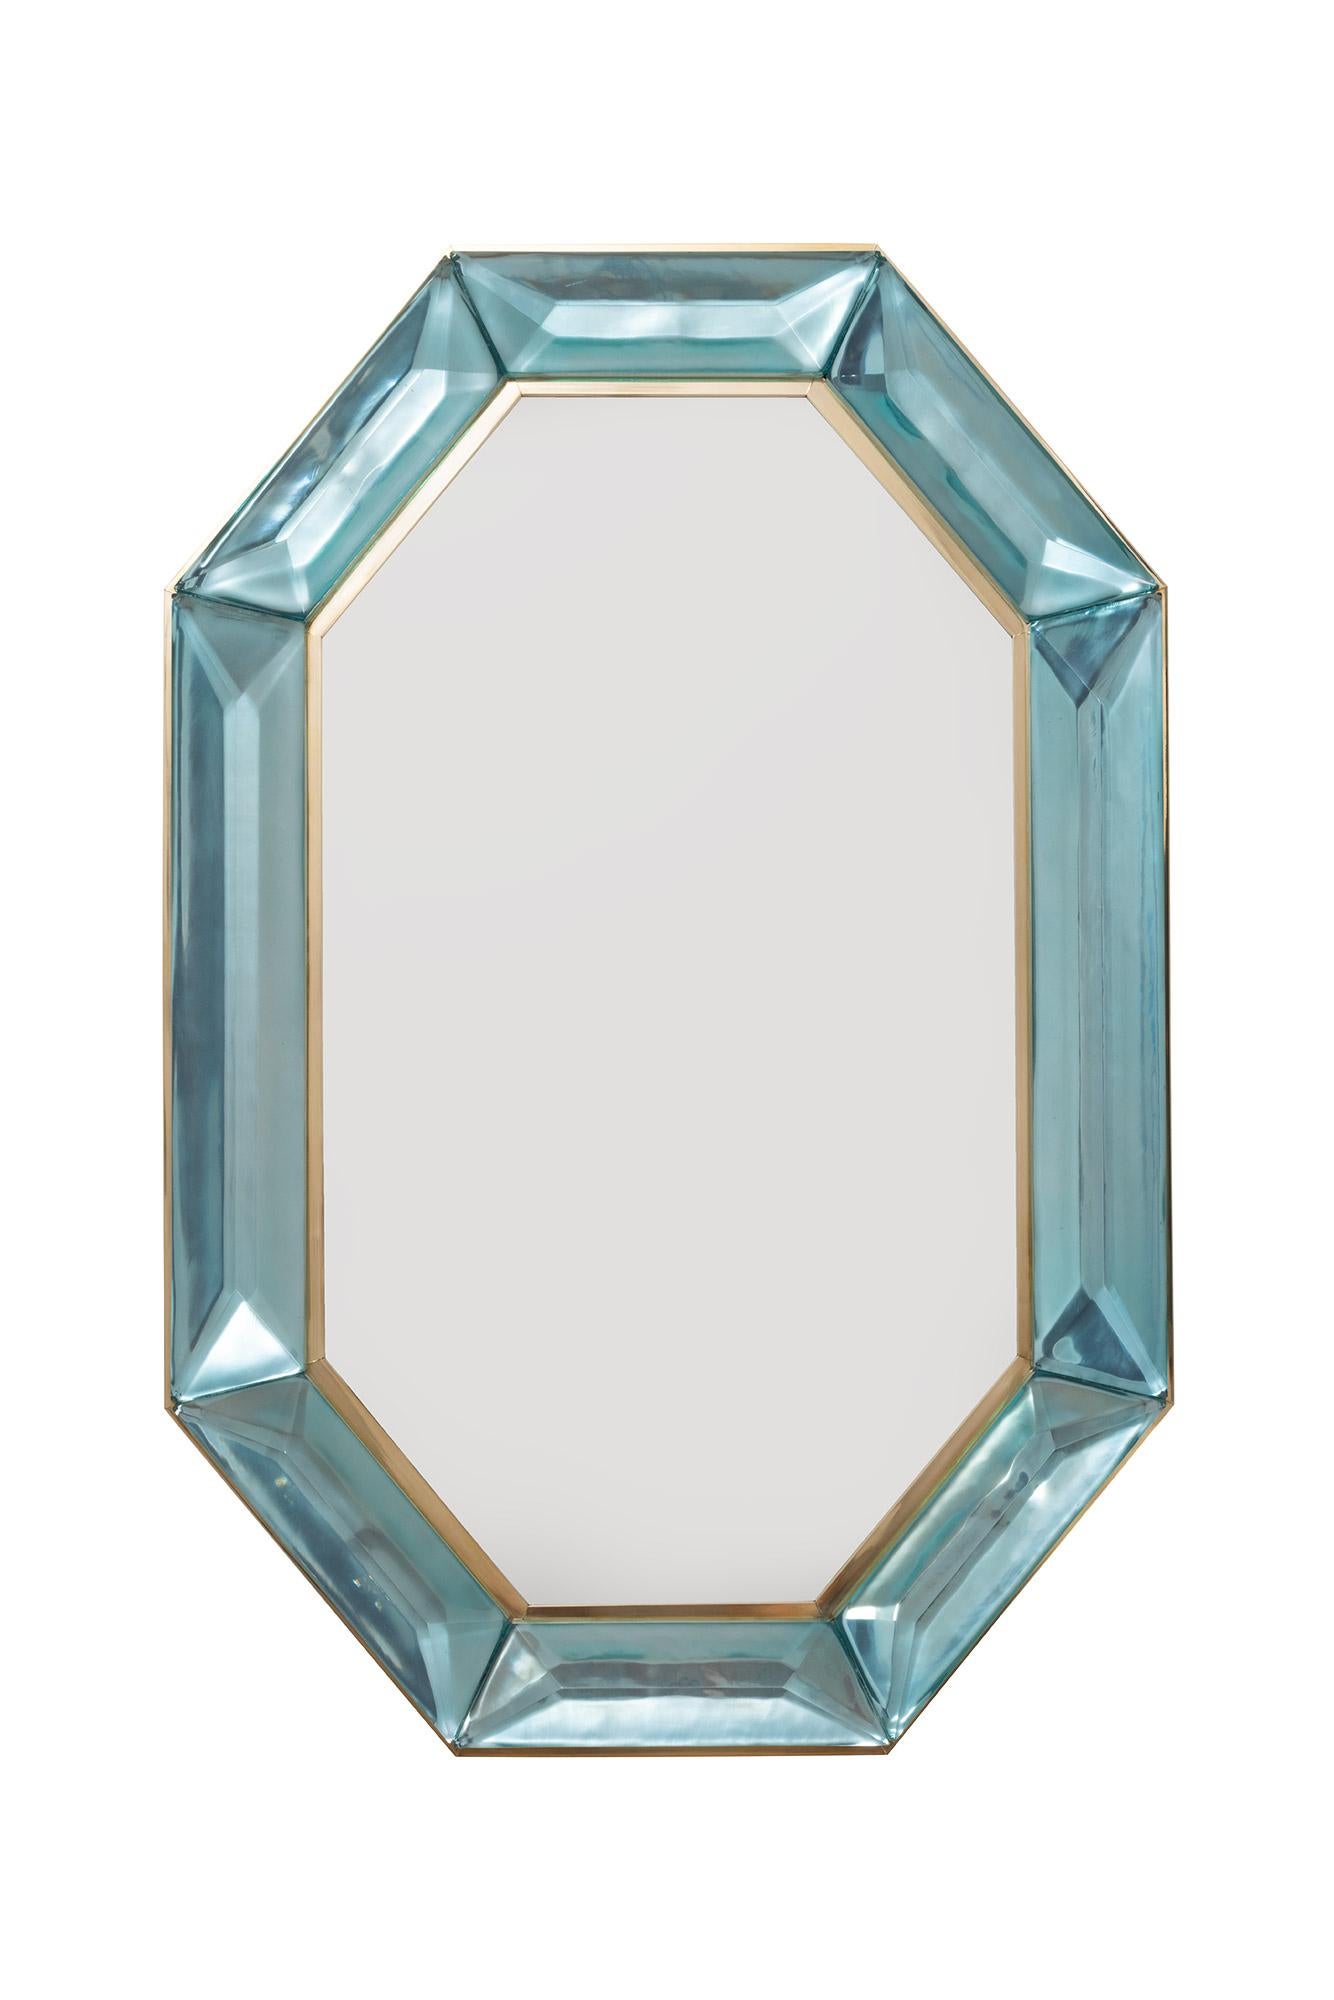 Bespoke octagonal Tiffany blue Murano glass and brass mirror, in stock
Vivid and intense Tiffany blue glass block with naturally occurring air inclusions throughout
Highly polished faceted pattern
Brass gallery all around
Each mirror is a unique